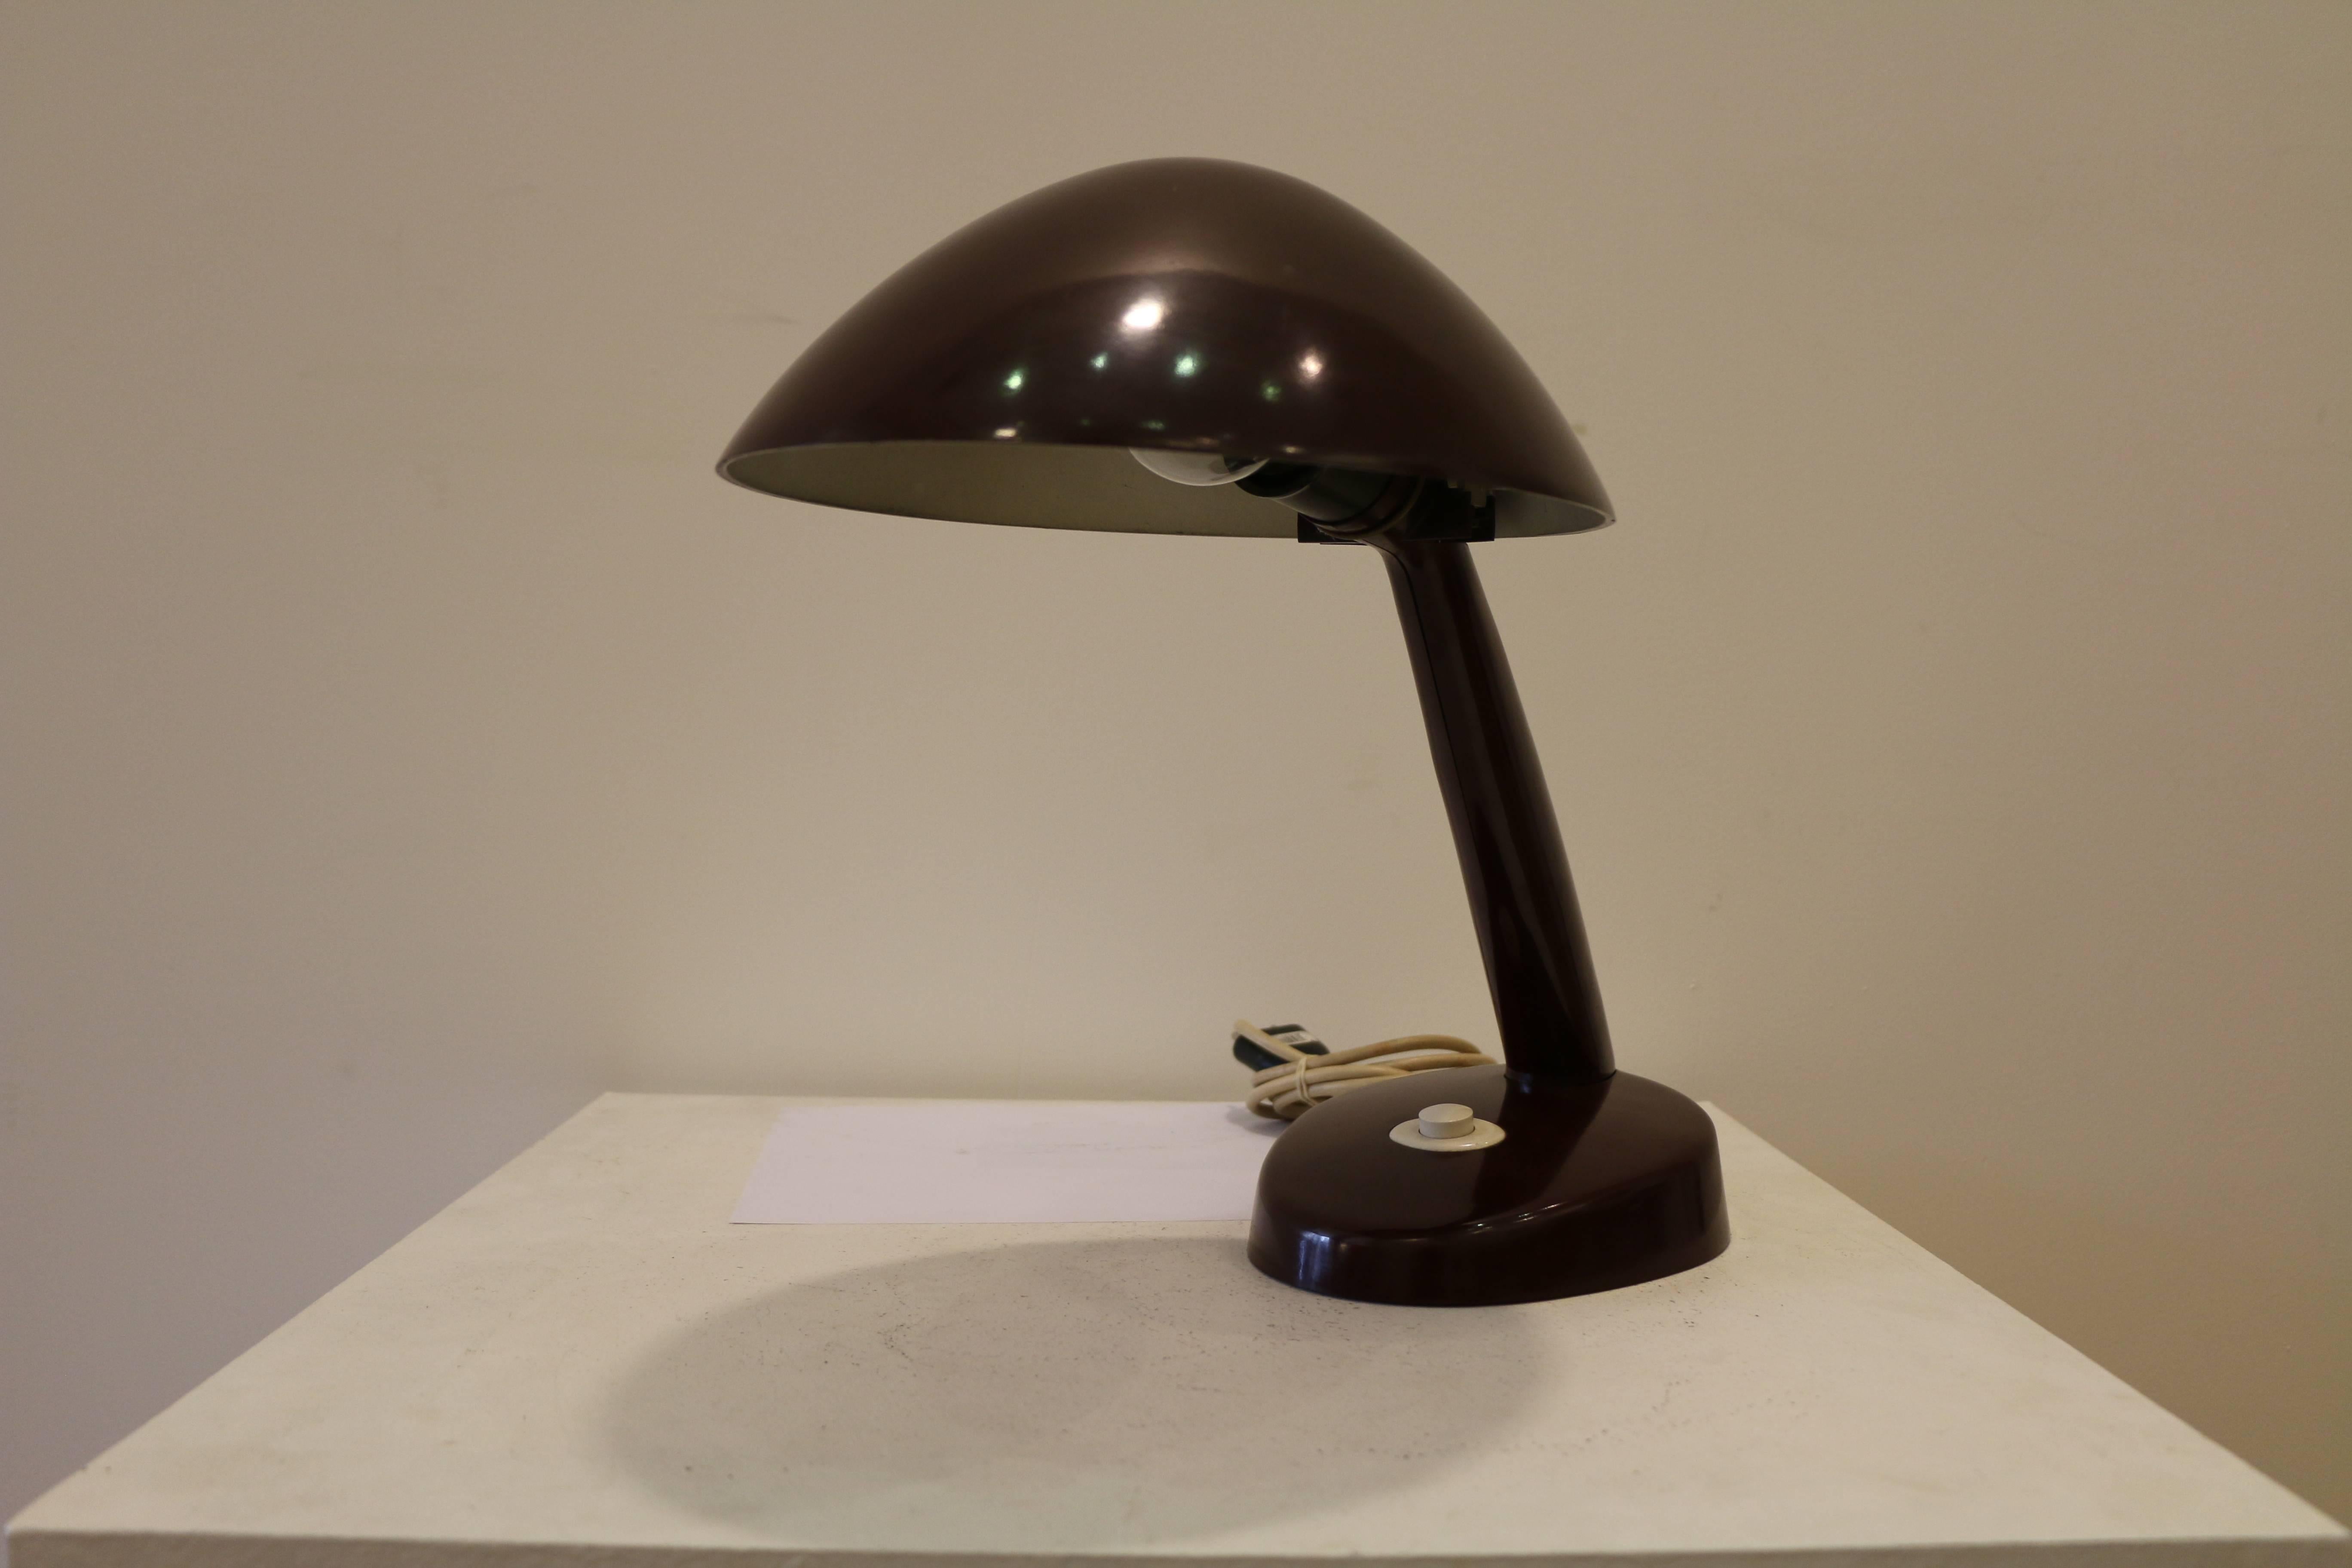 From 1924, lamp design became a field of interest at the Bauhaus, led by Brandt. Brandt was key in organizing the cooperation between the Bauhaus and Kandem, which encouraged the Bauhaus artists to take the step from manual production of unique